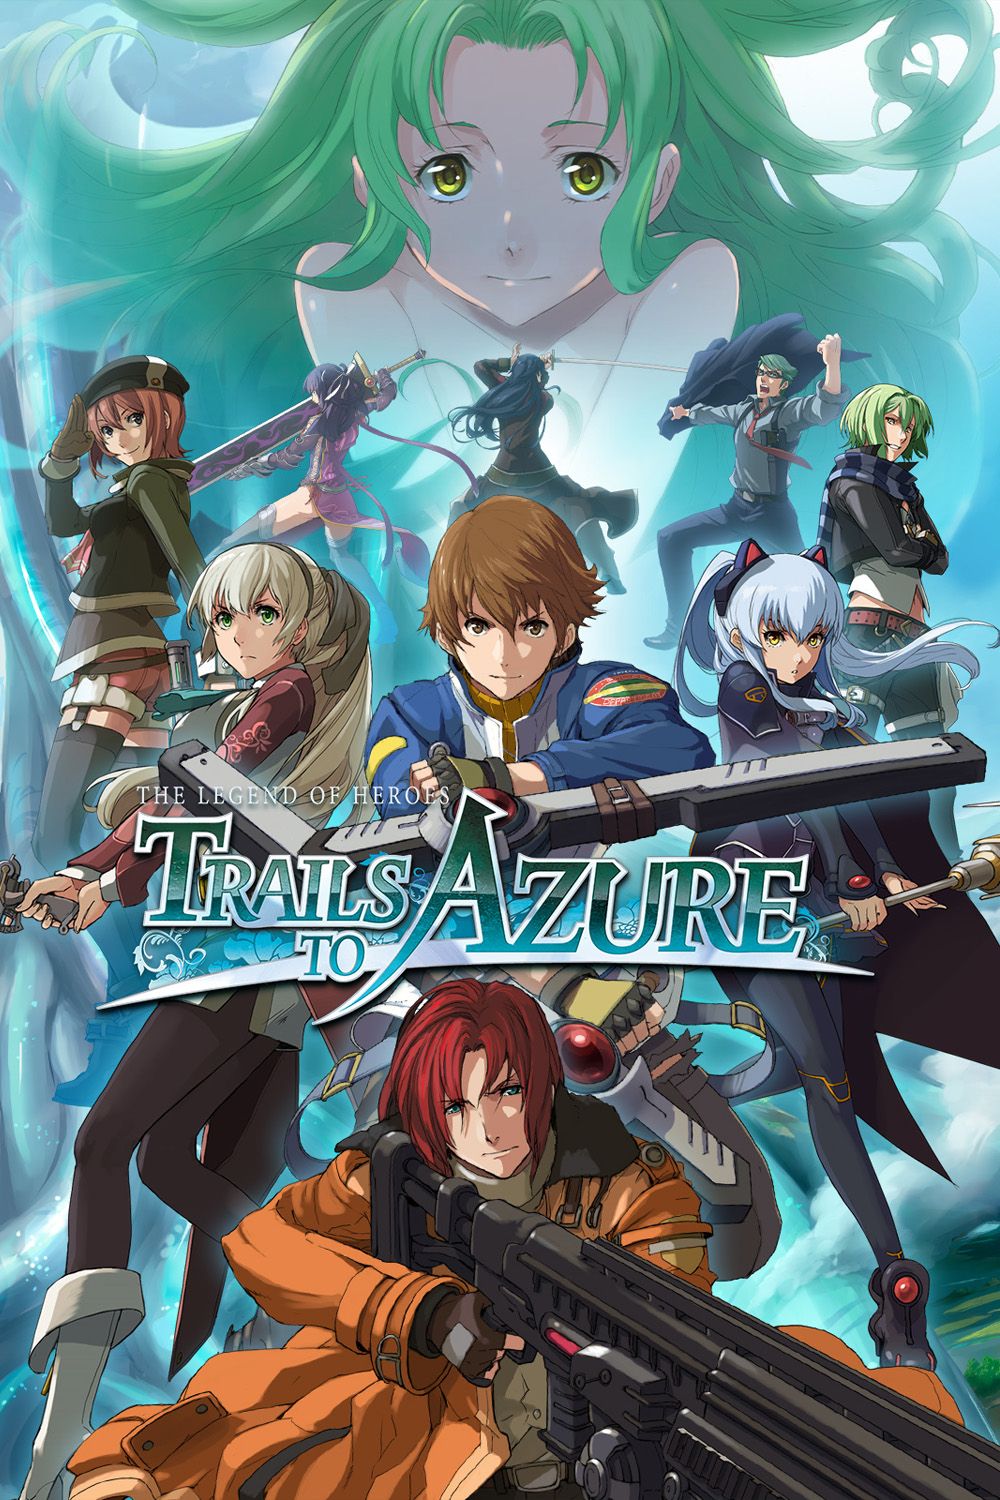 THE LEGEND OF HEROES TRAILS TO AZURE